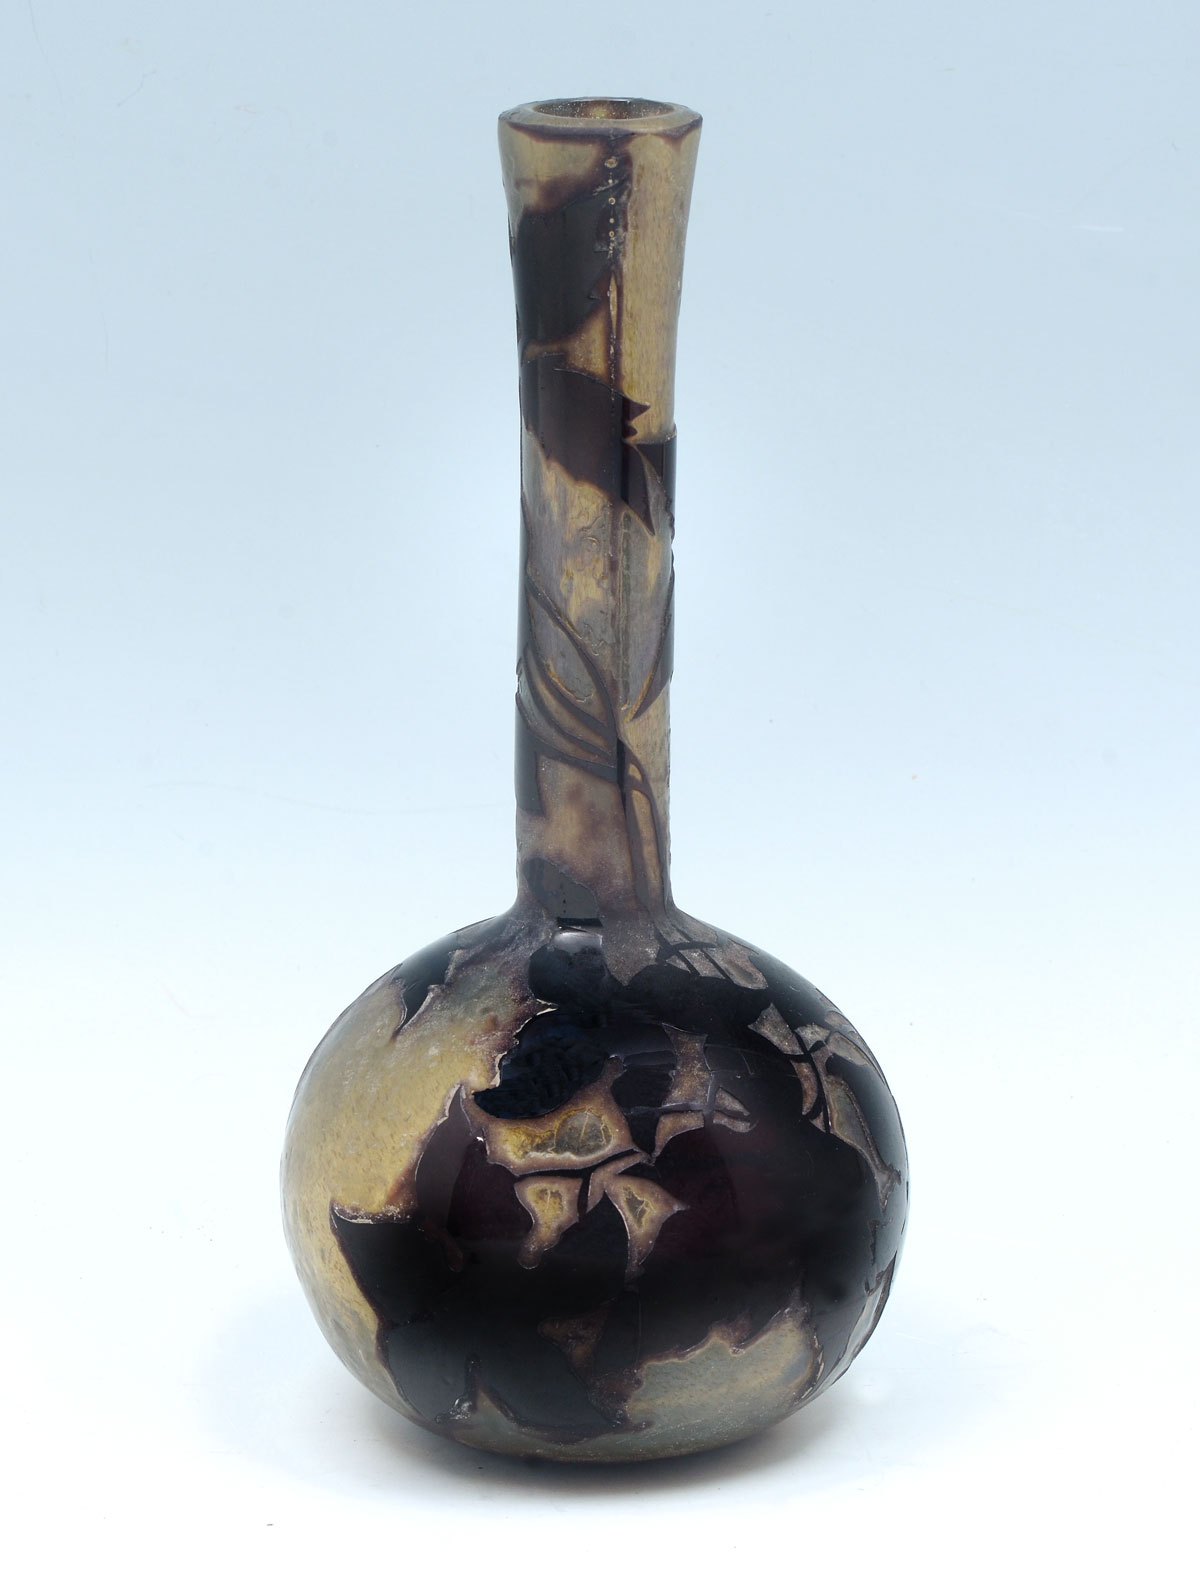 EARLY CAMEO GLASS VASE: Early Galle